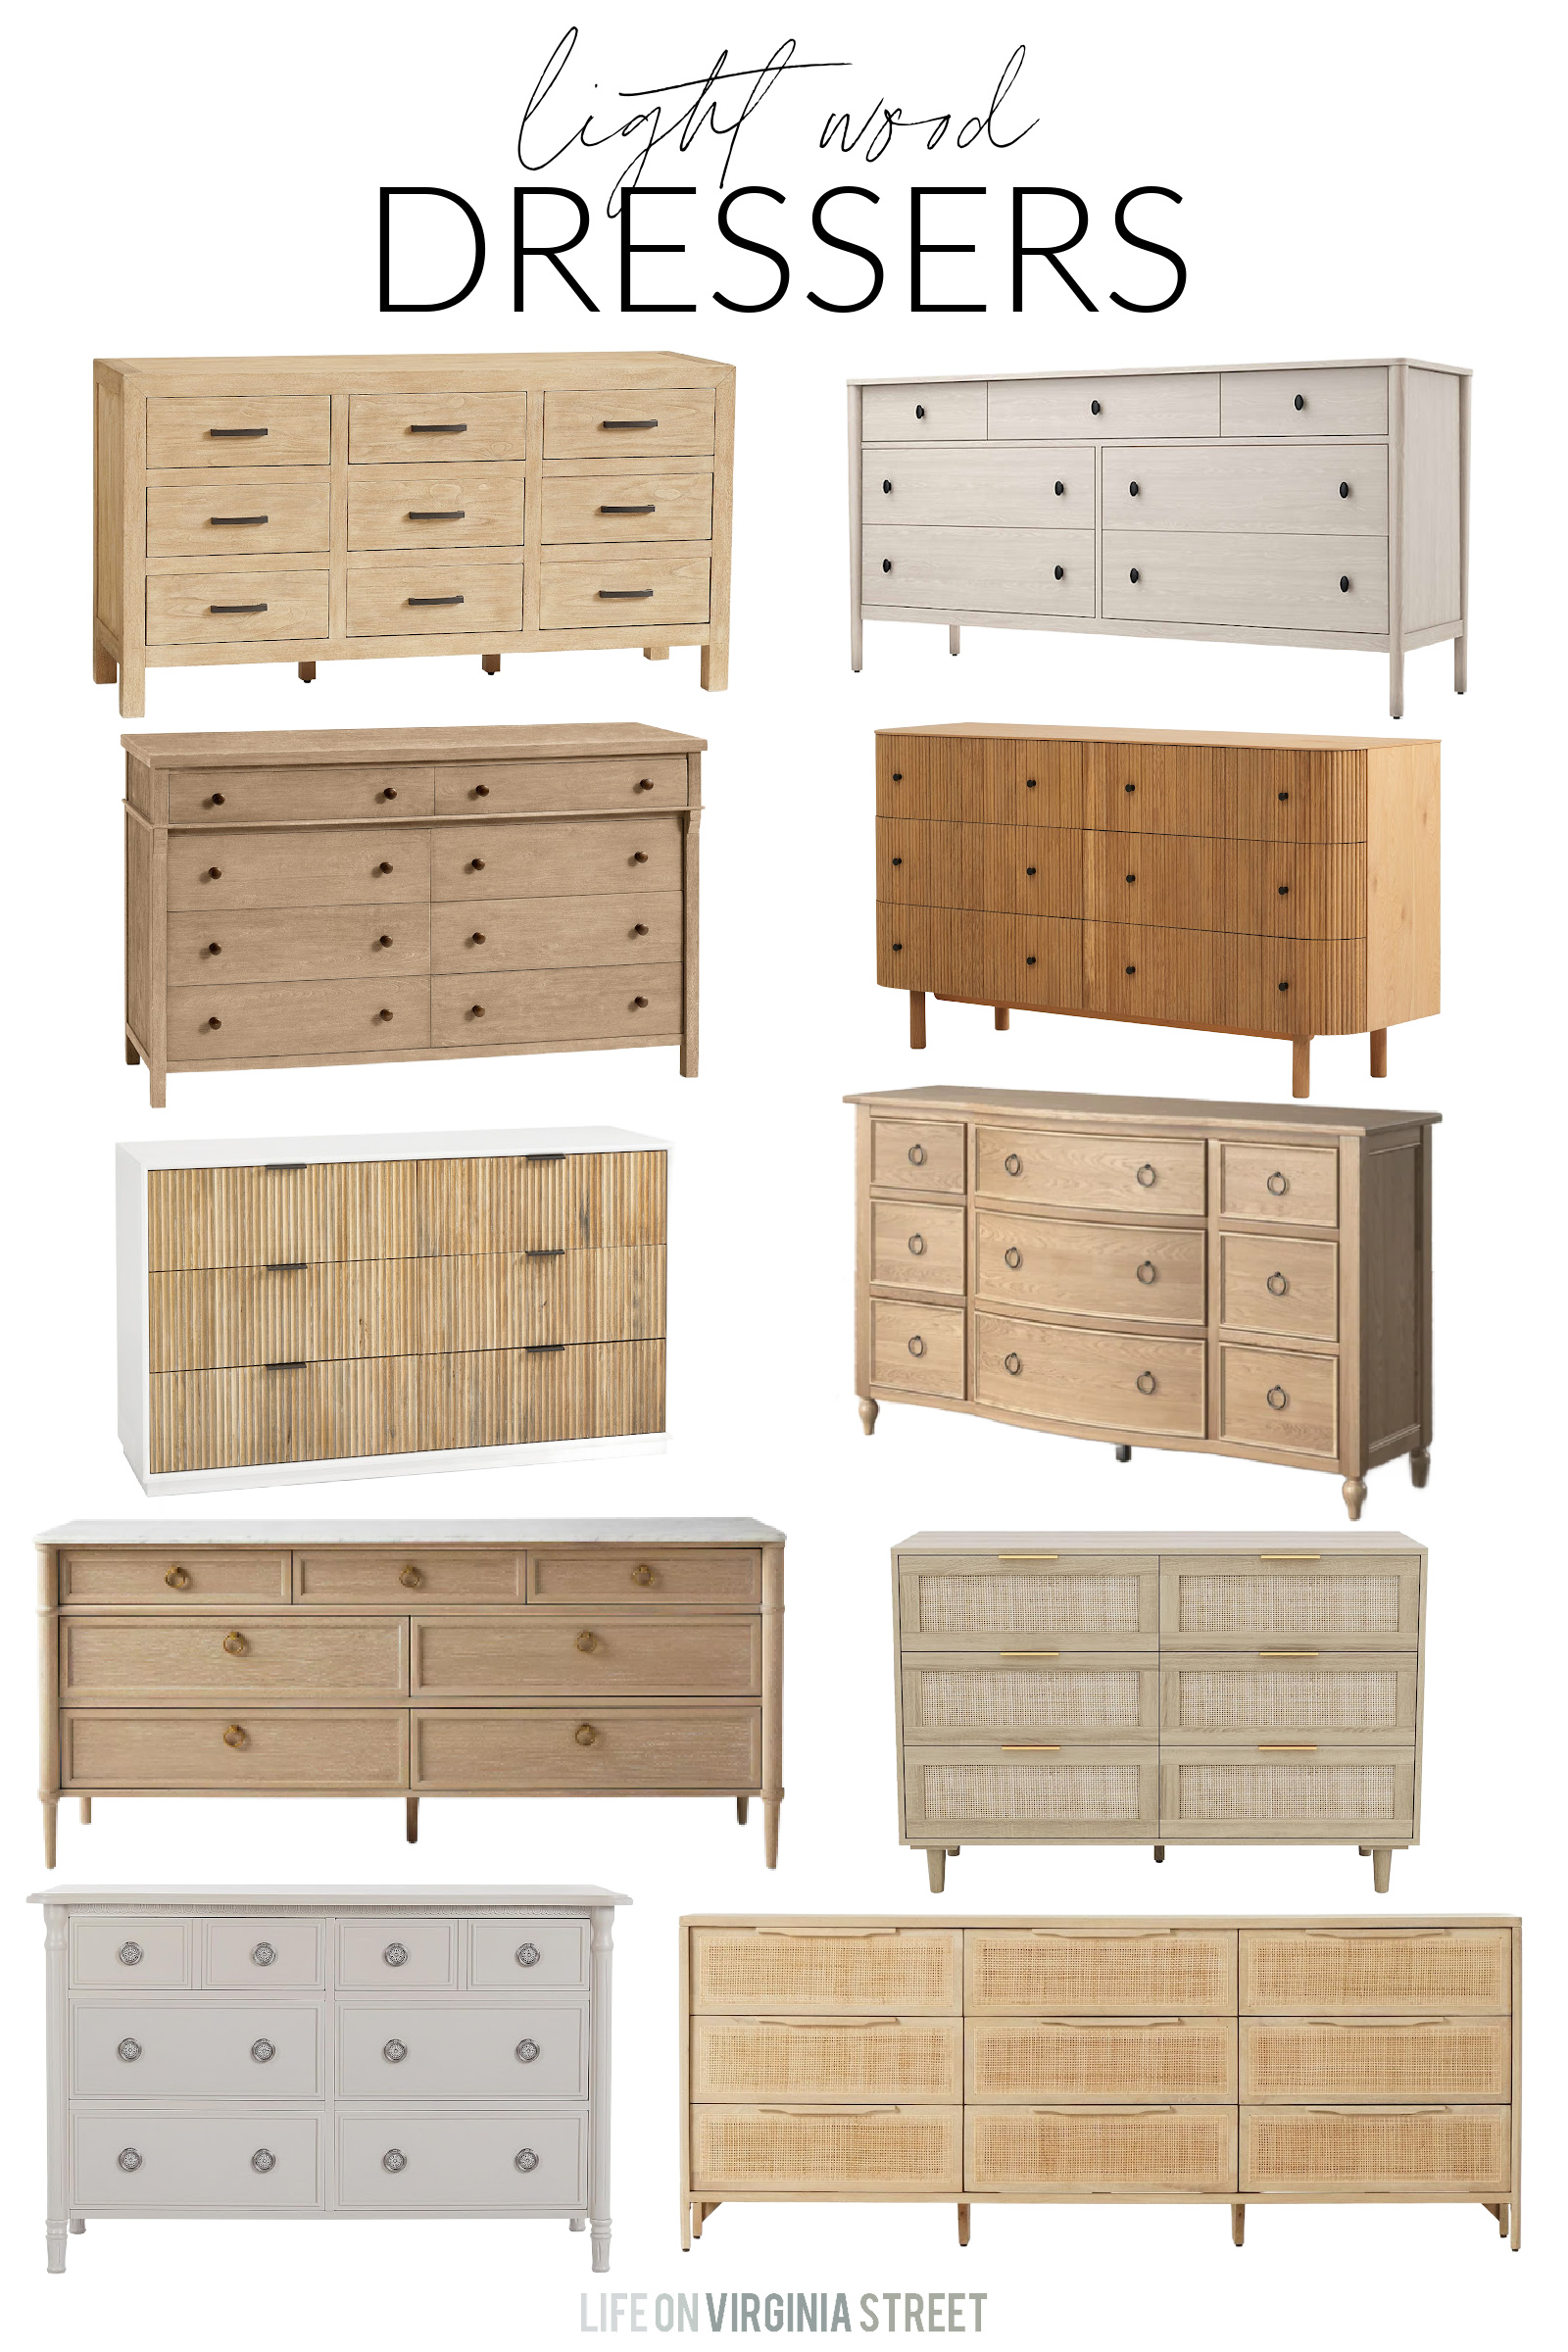 A collection of light wood dressers for a variety of decorating styles and budgets.